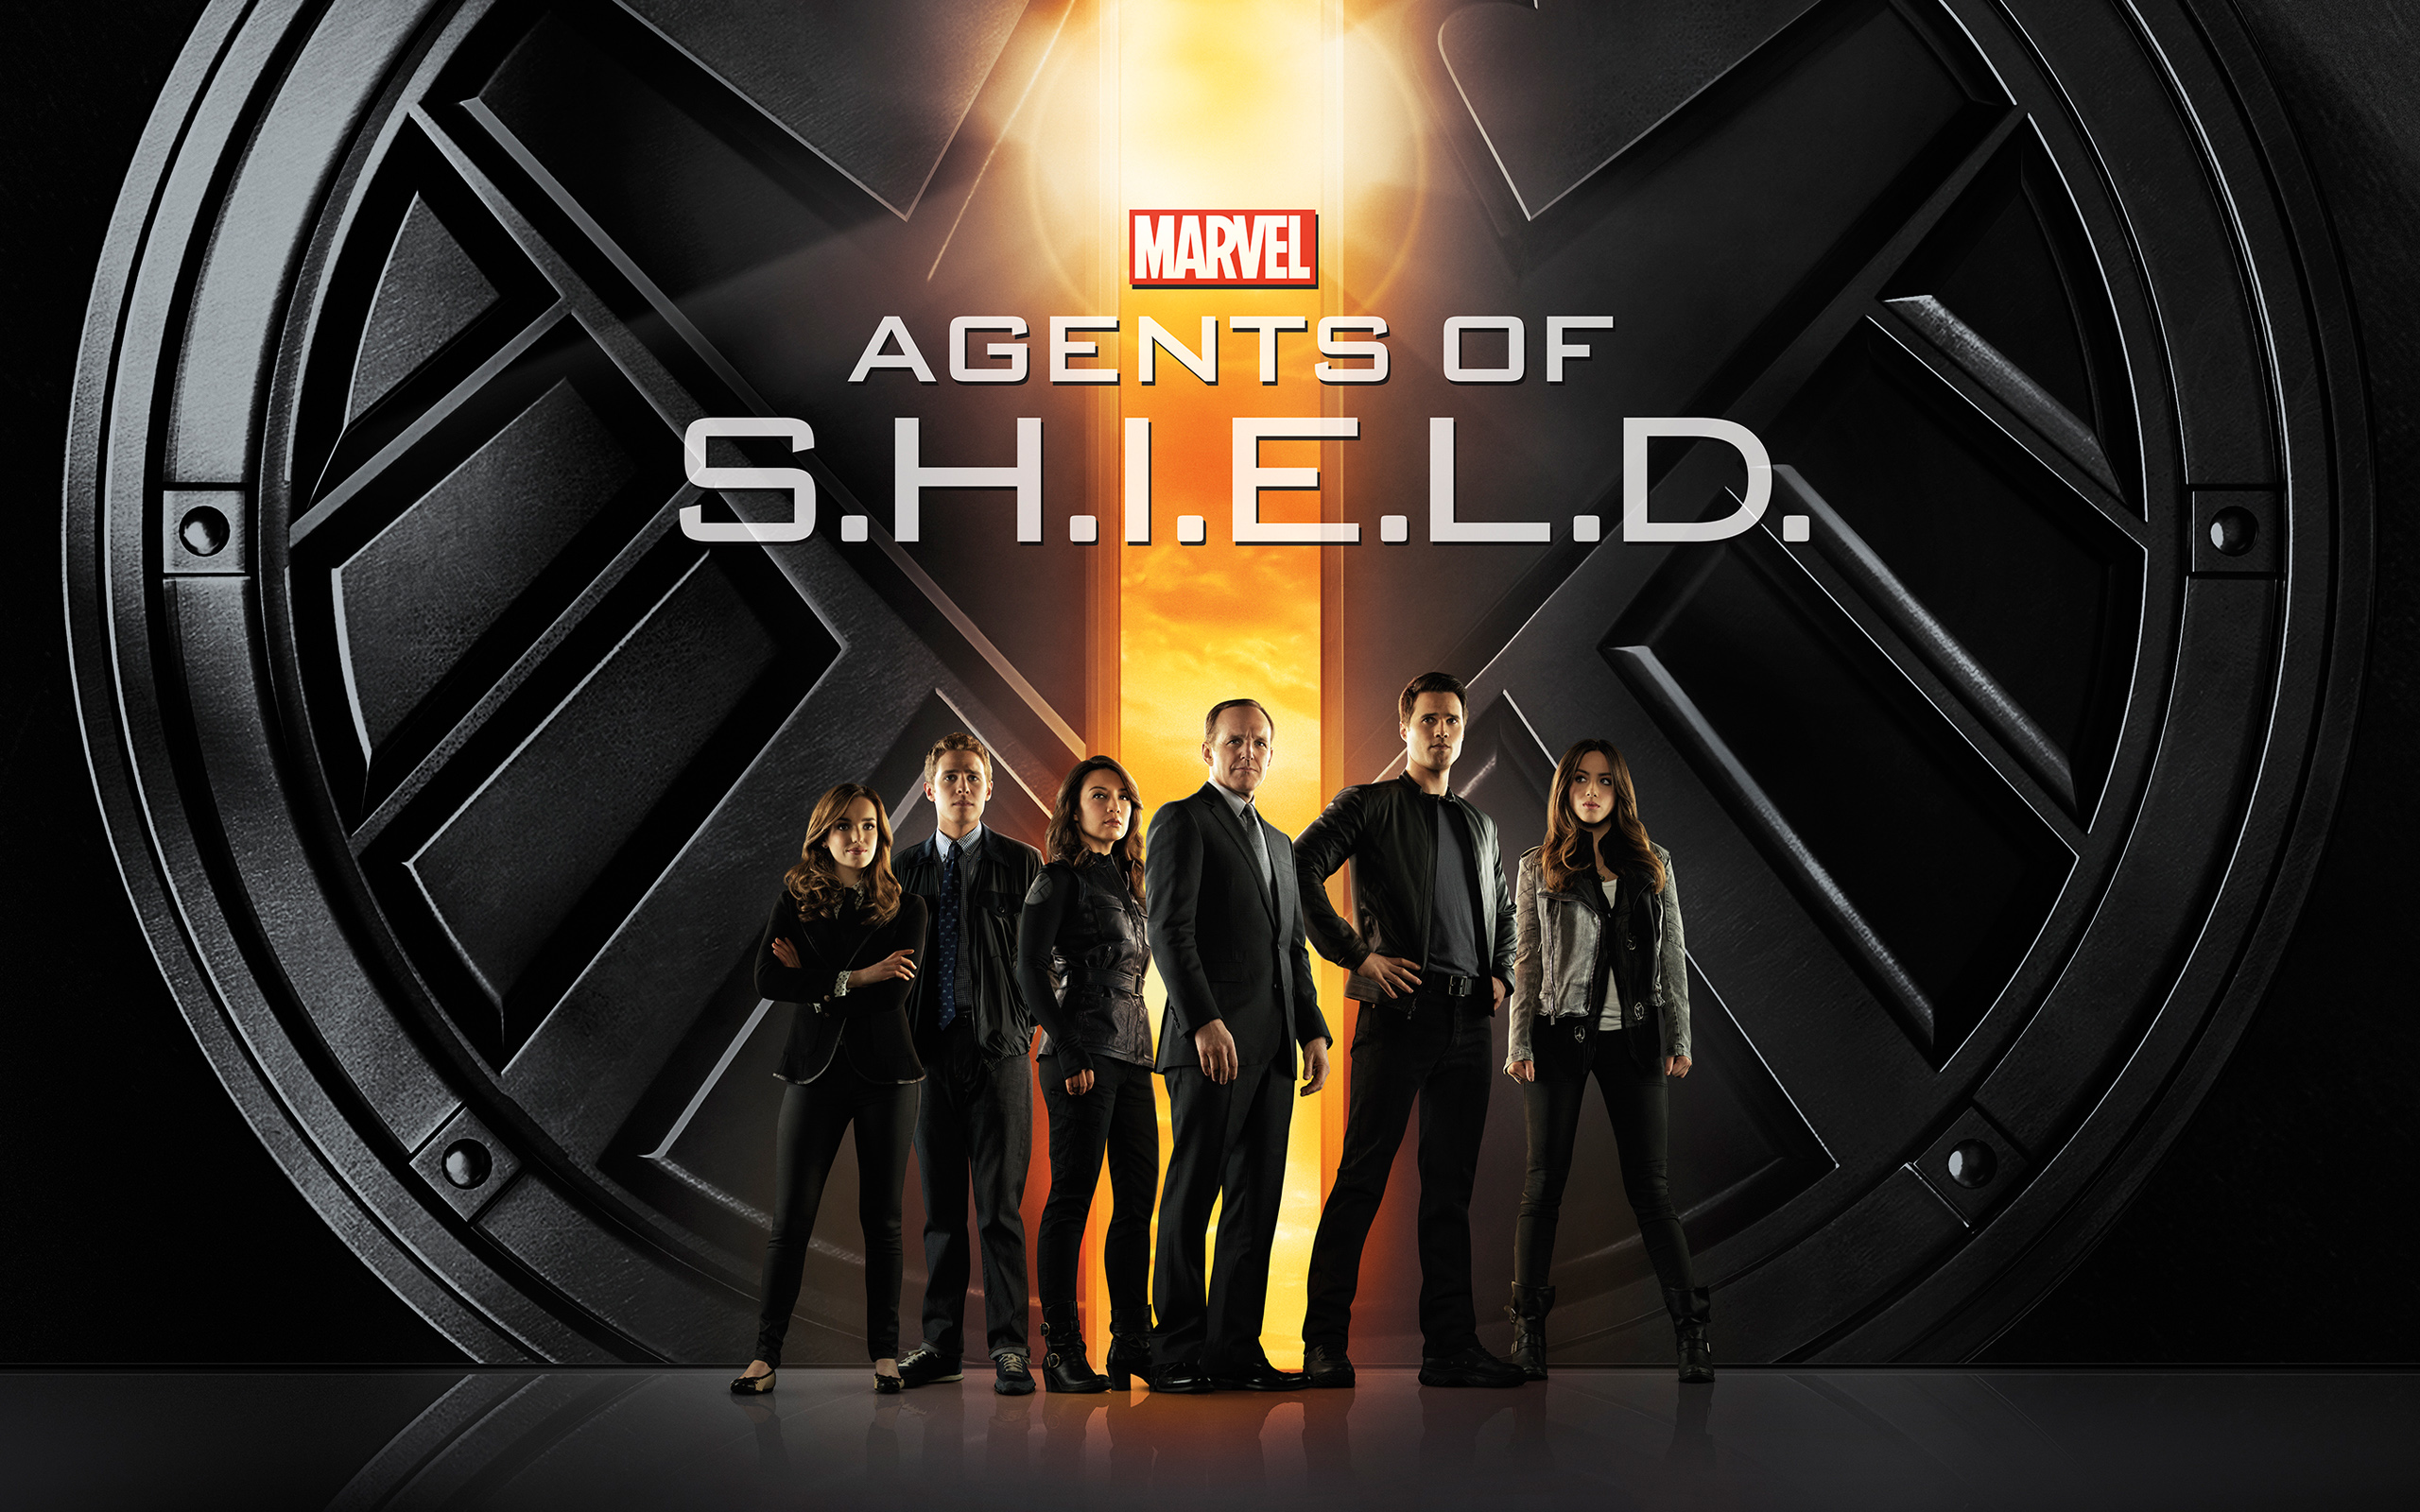 Agents of SHIELD Wallpaper hd background HD Wallpapers